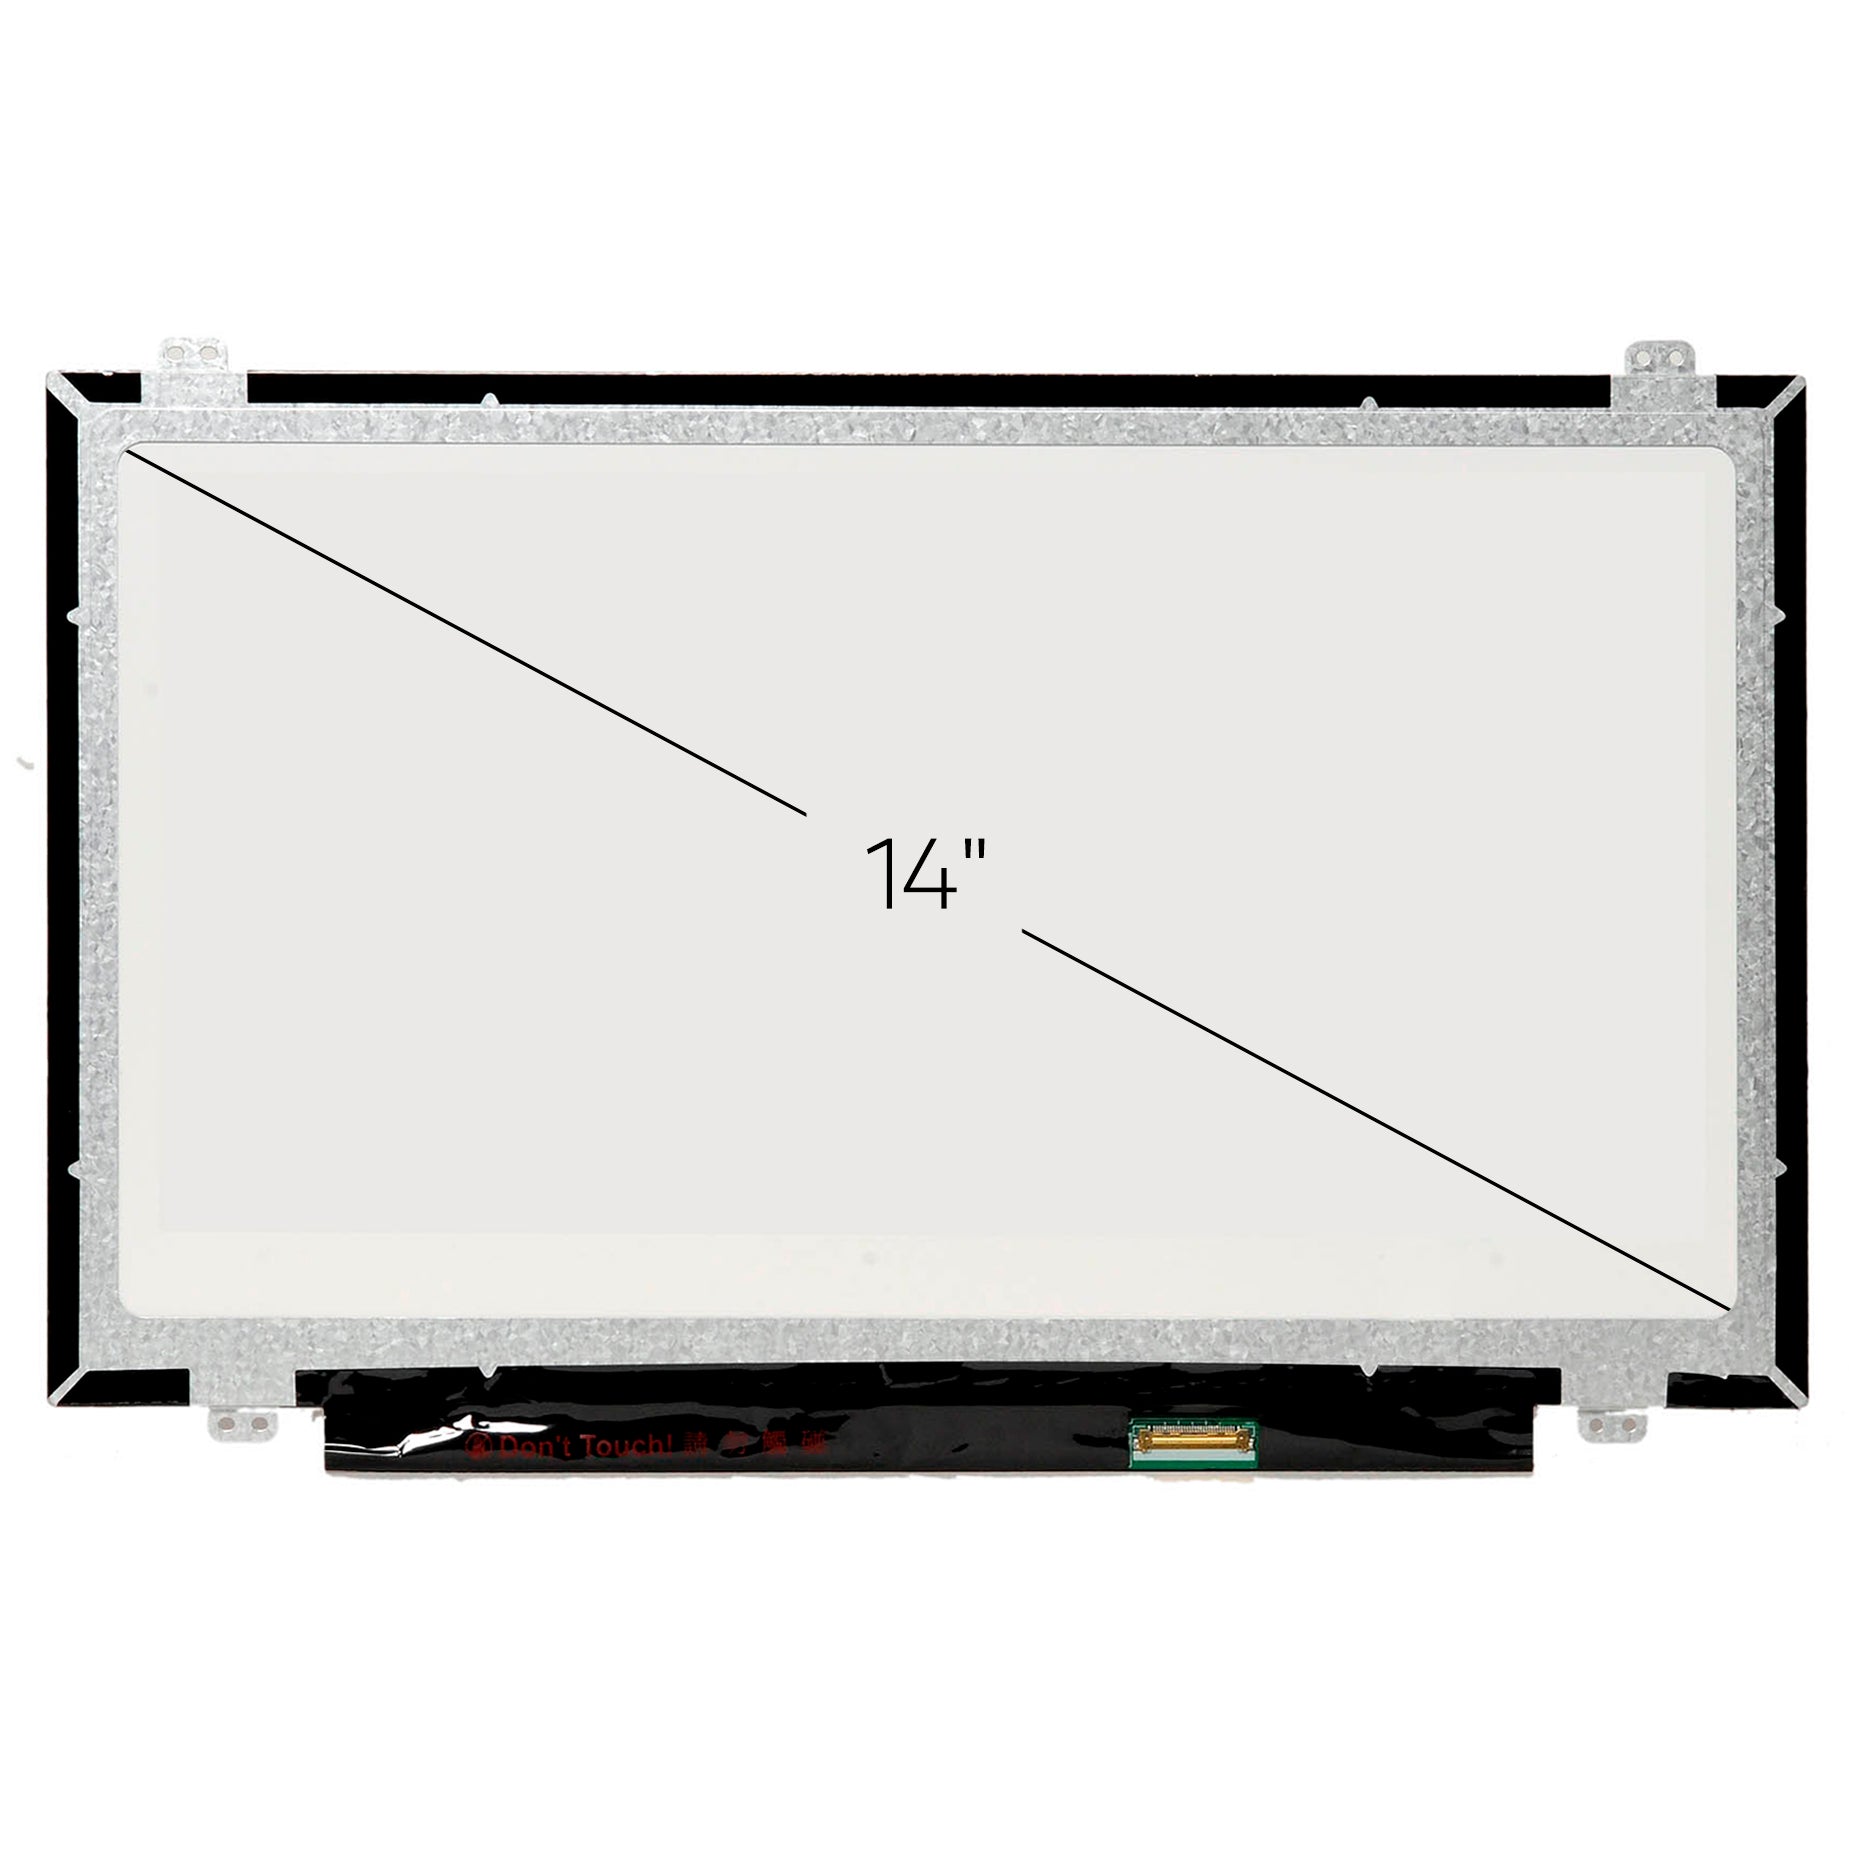 Screen Replacement for LP140WH8(TP)(C1) HD 1366x768 Glossy LCD LED Display